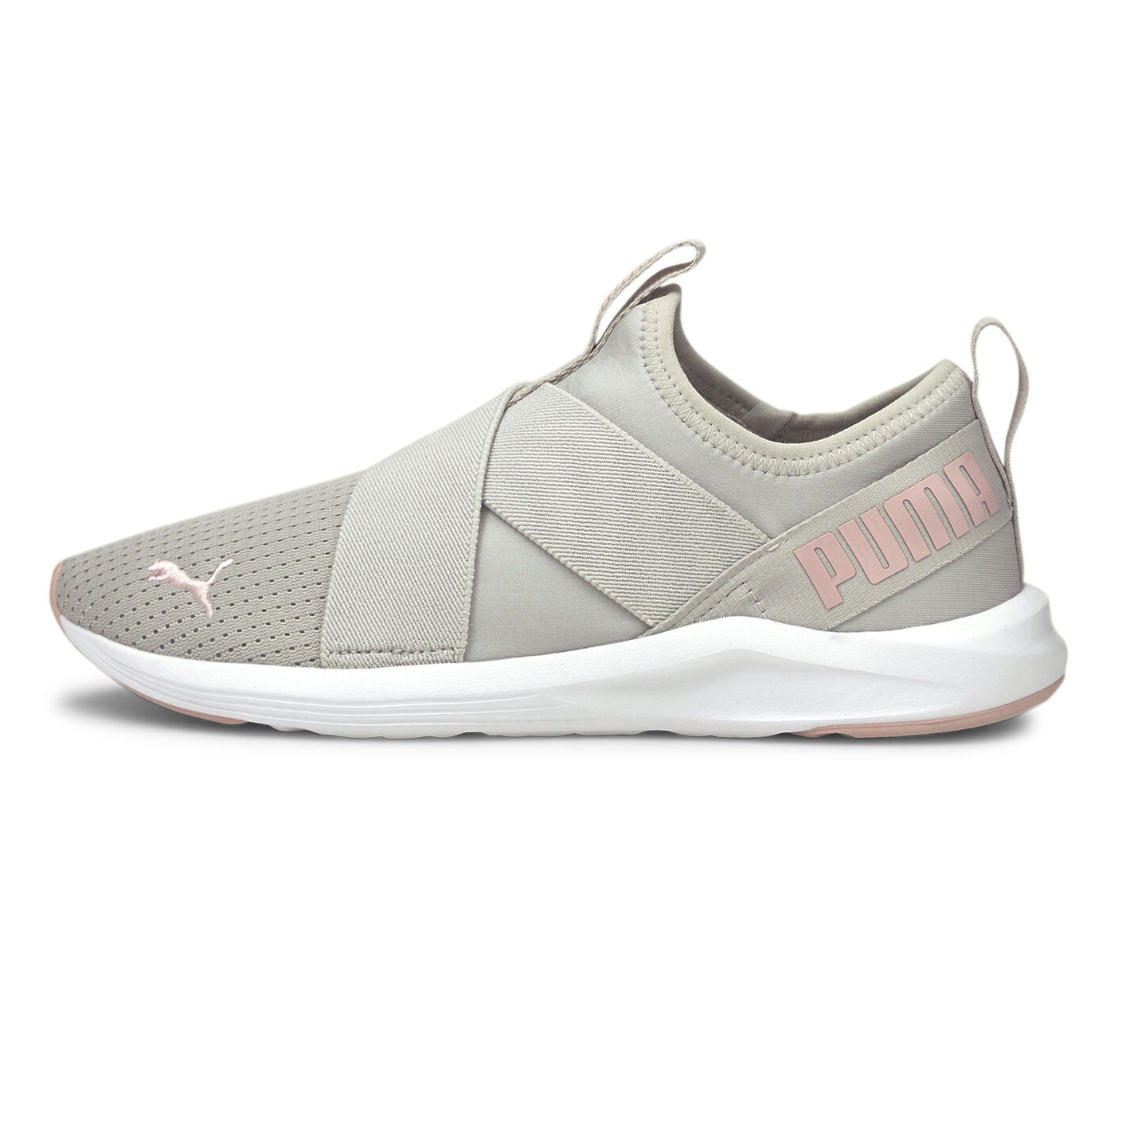 Price drop! Puma women's Prowl Slip On training shoes for $28, free ...